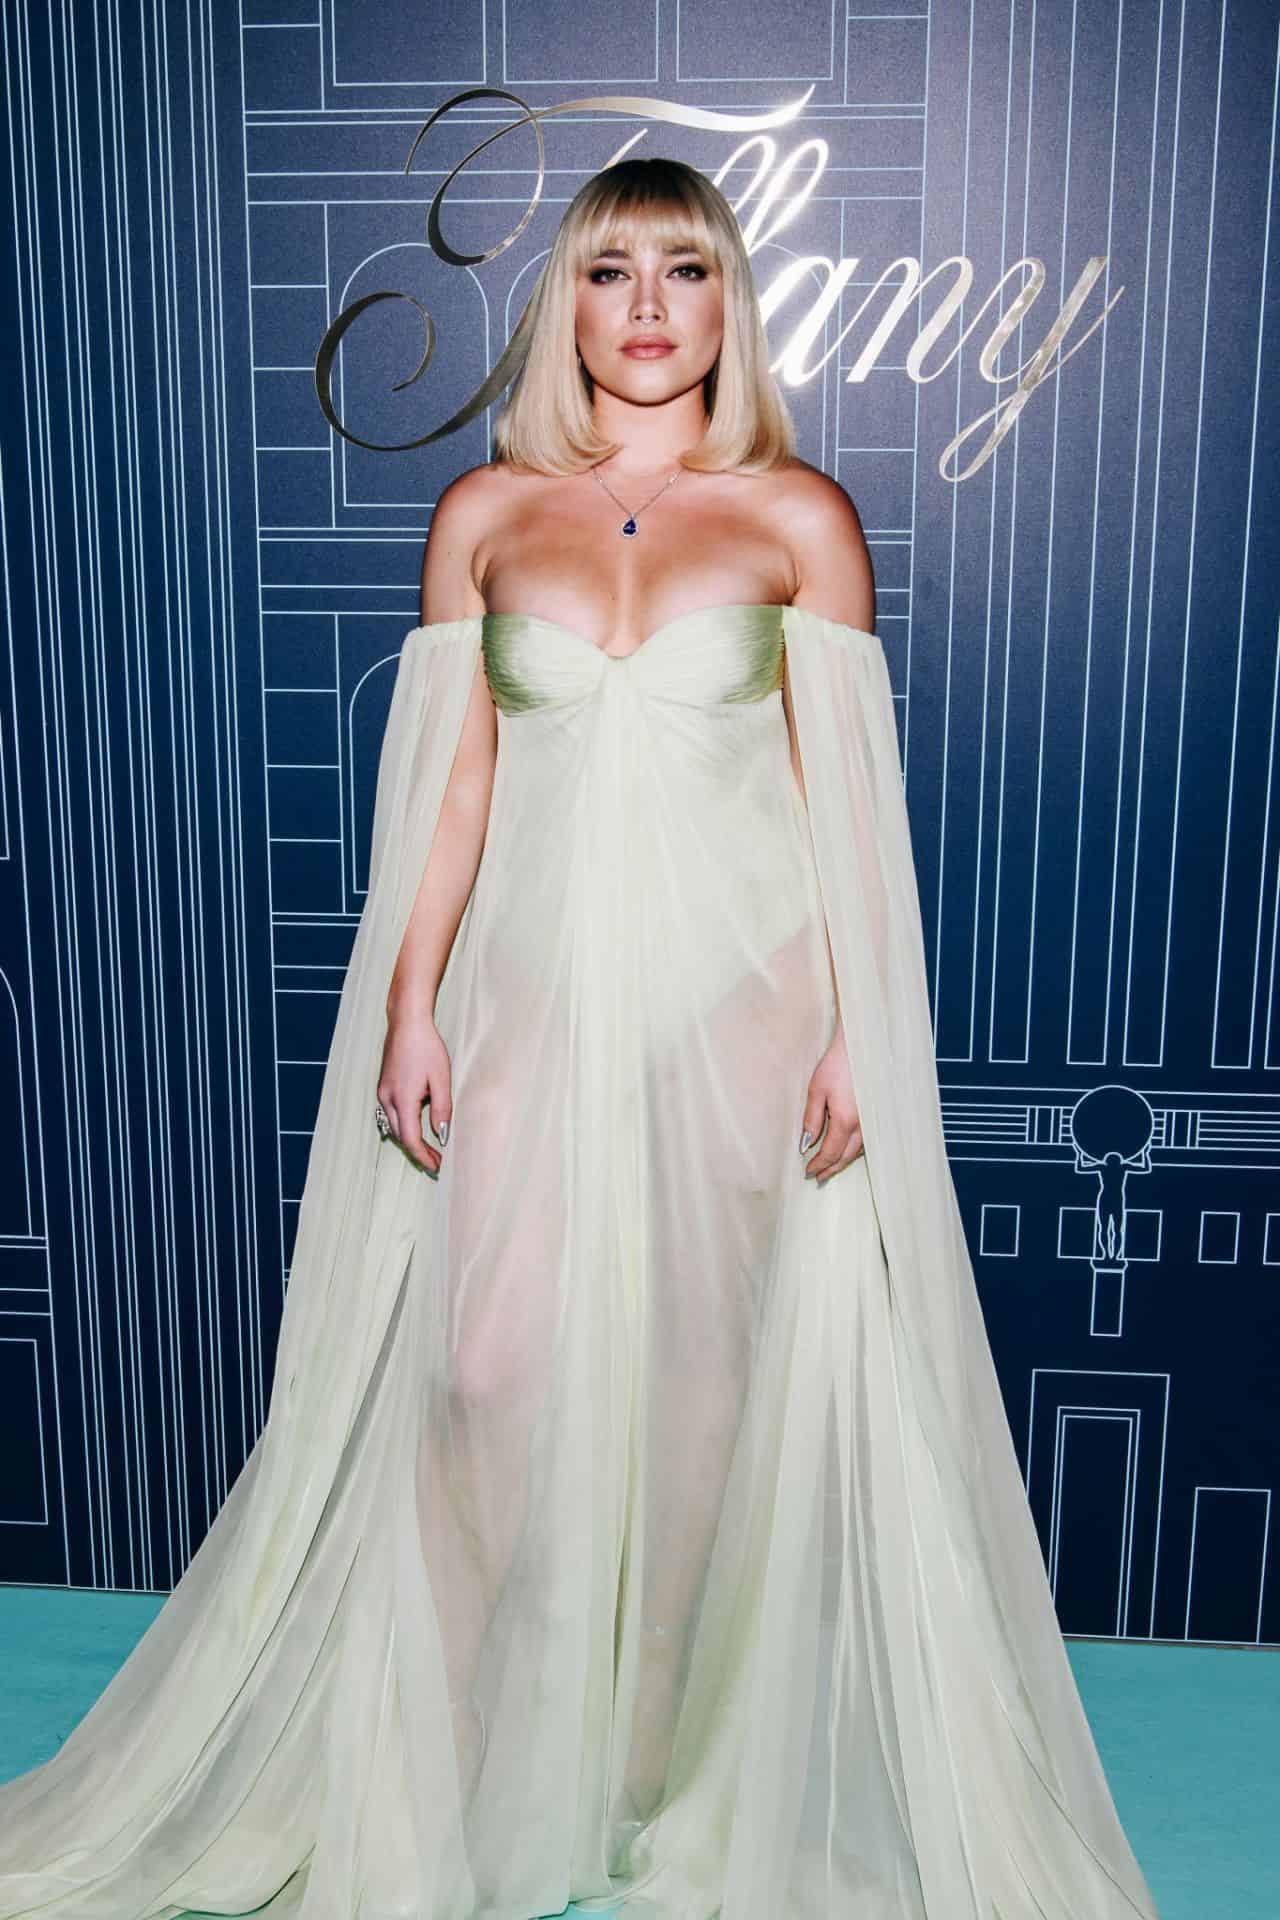 Florence Pugh in Sheer Dress at Tiffany & Co.'s Flagship Store Re-Opening